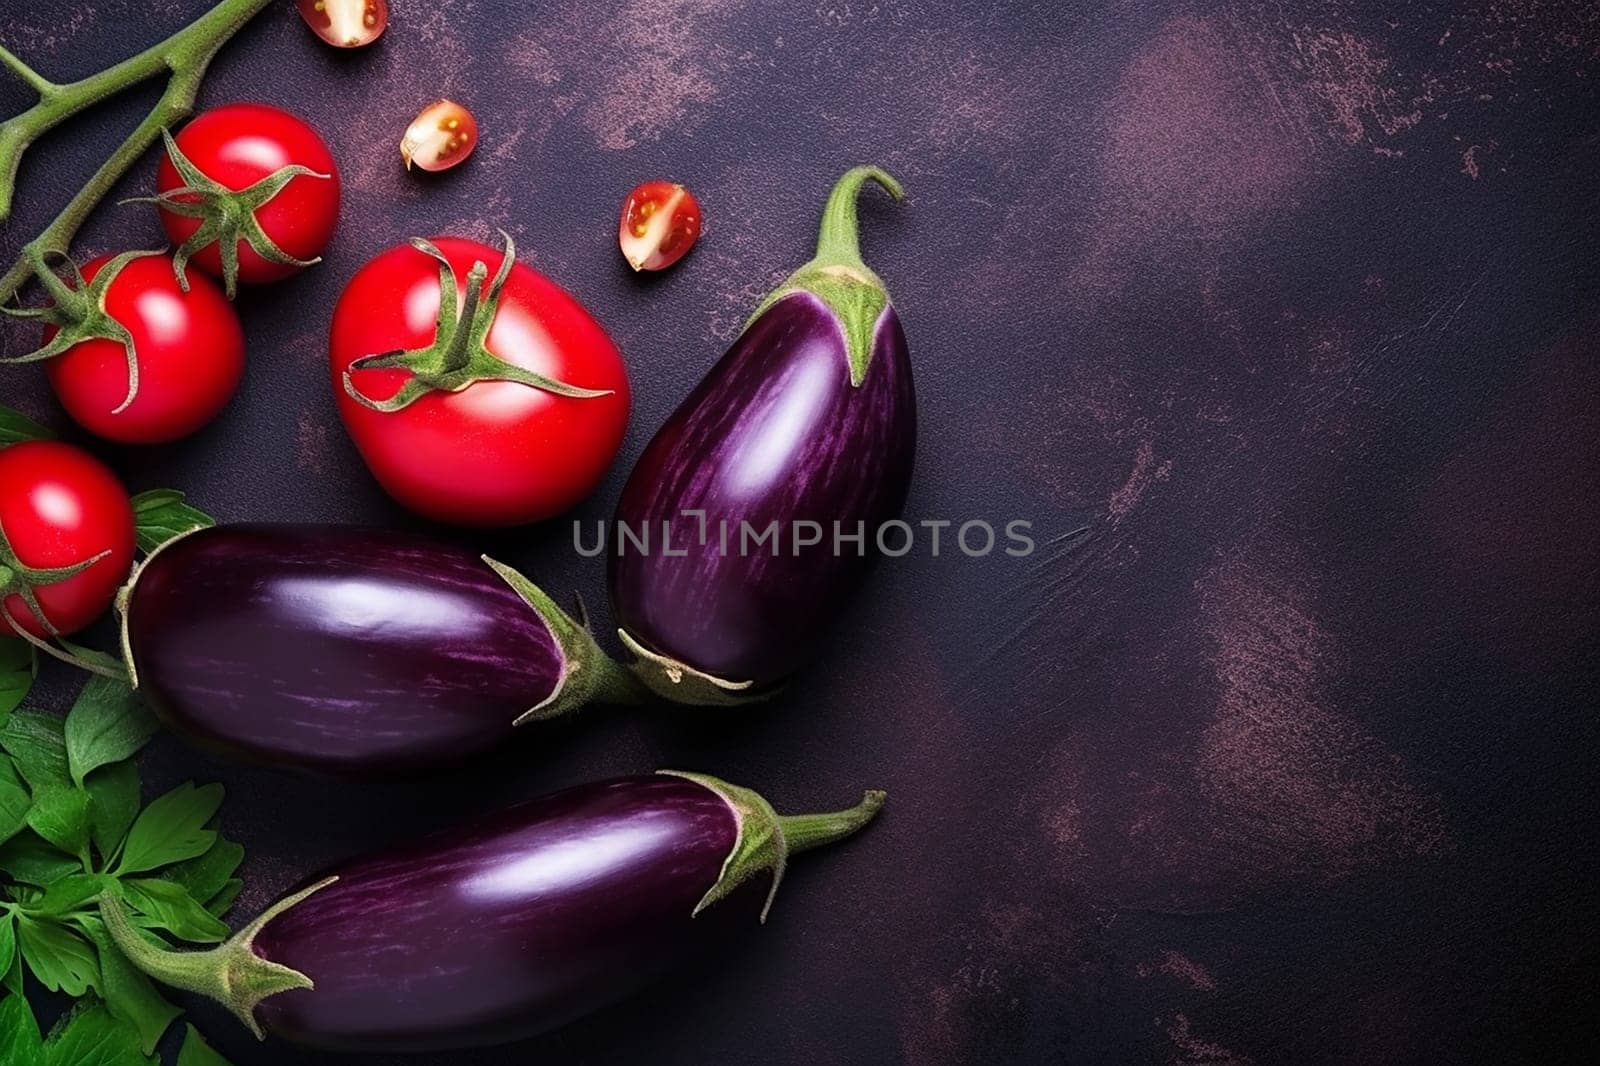 Three fresh eggplants with ripe tomatoes and greenery on a dark textured surface.